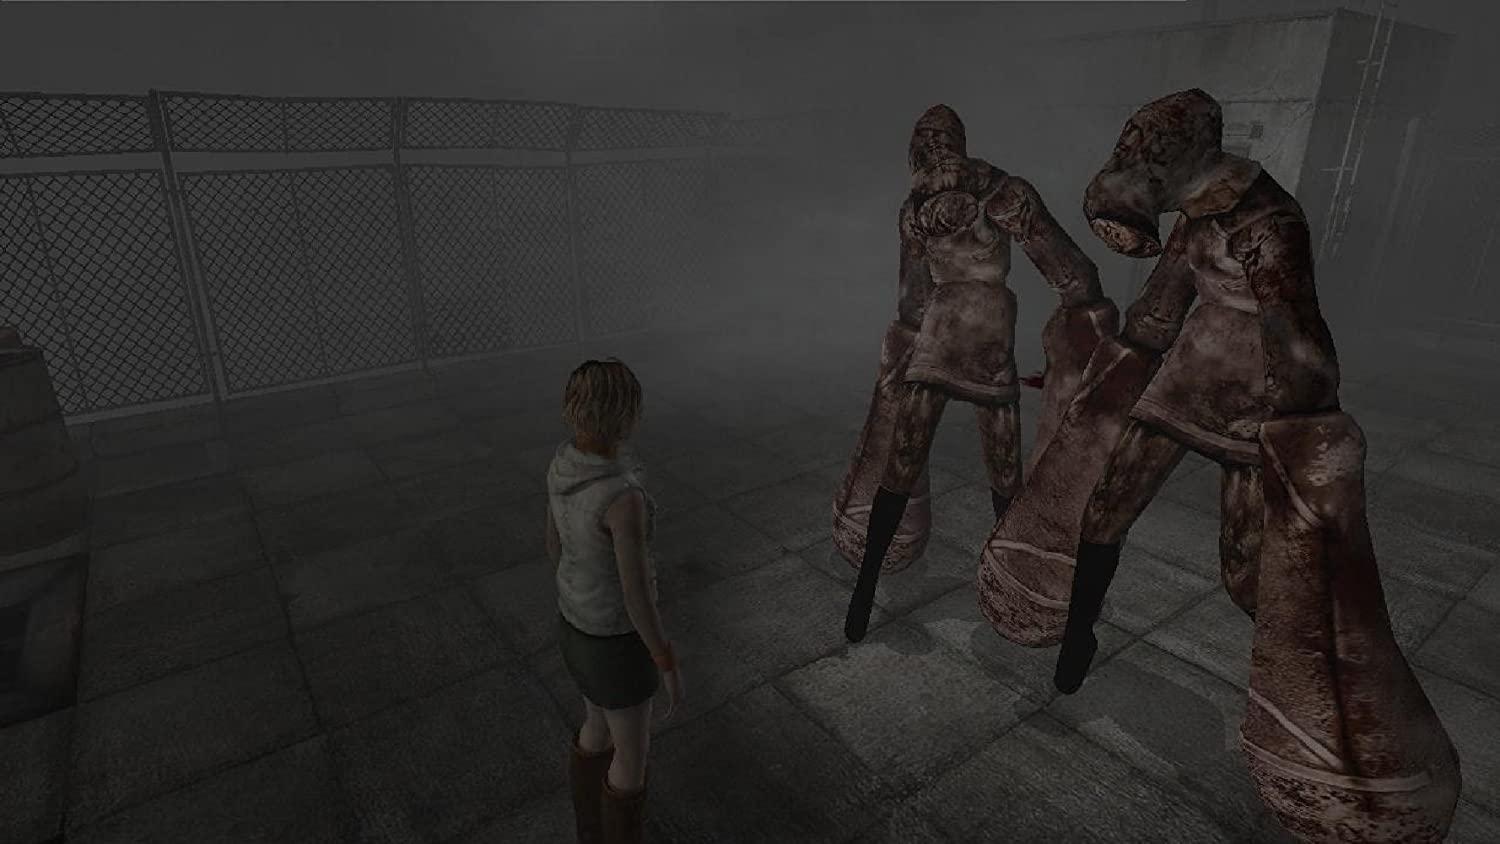 silent hill game xbox one